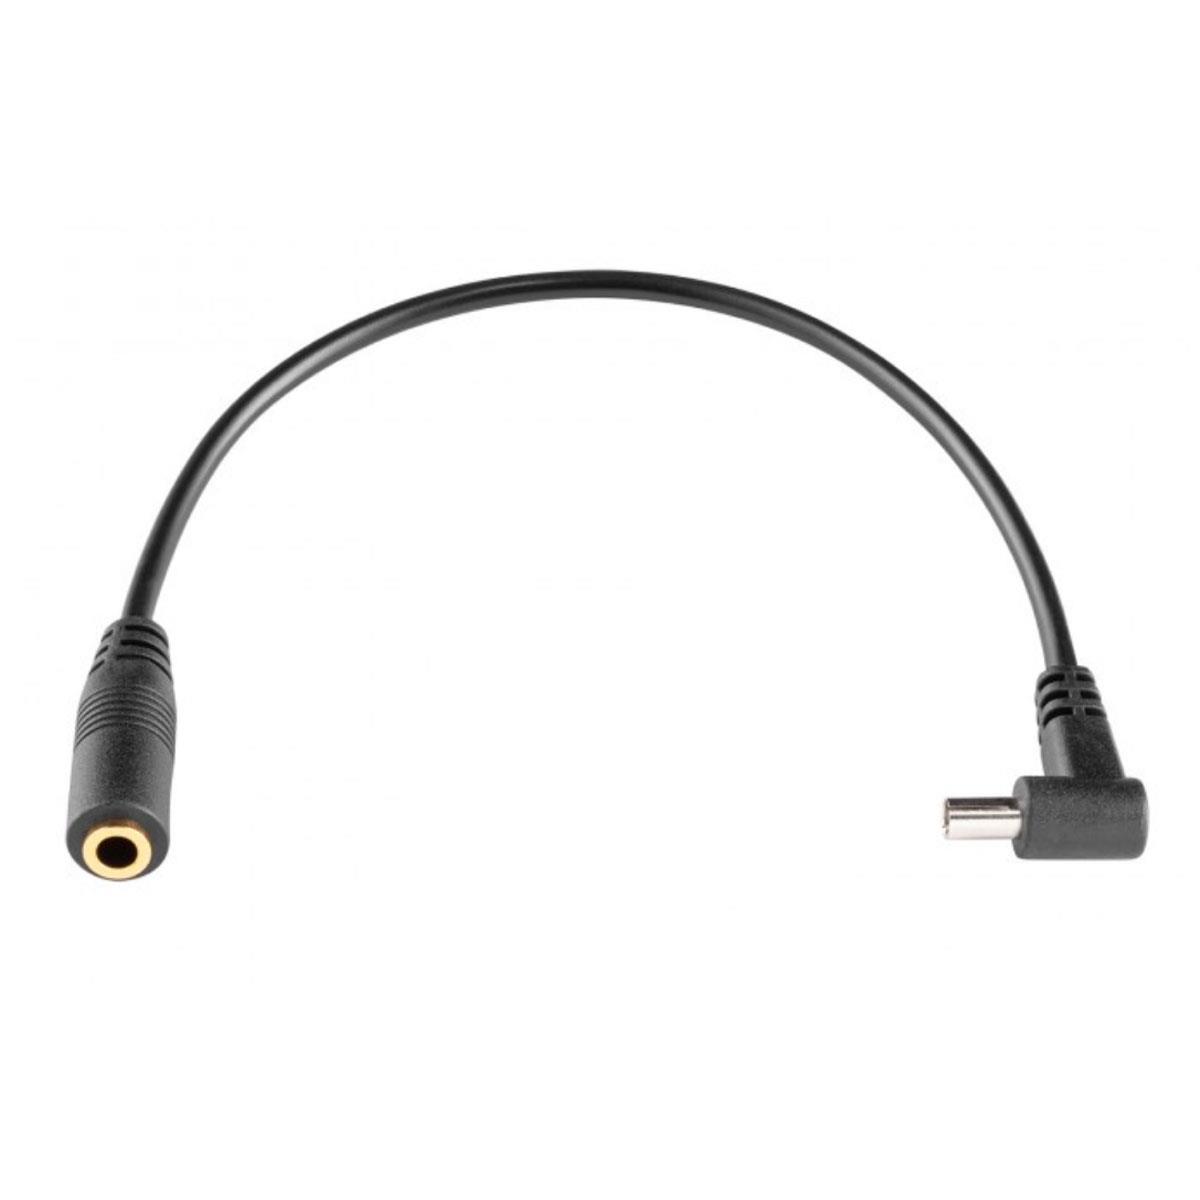 

Westcott PC Sync Male to Female Mini 3.5mm Cable